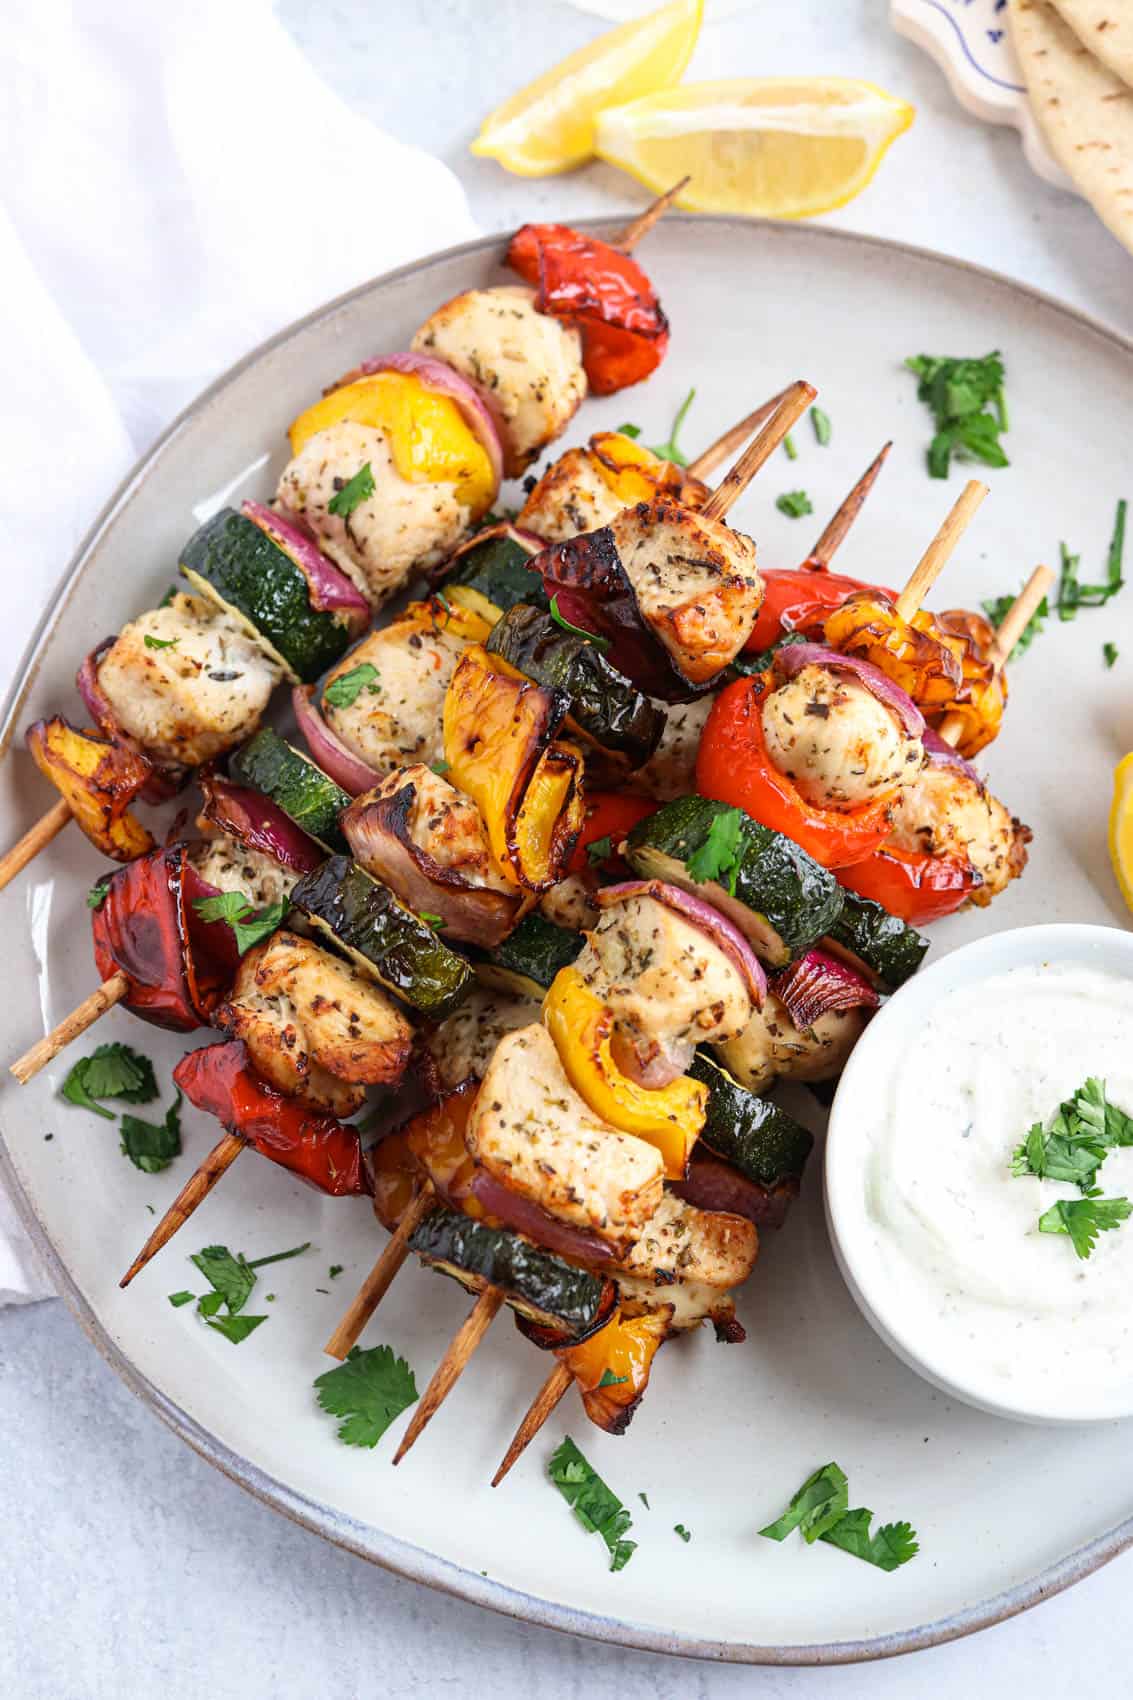 chicken and vegetable kebabs on wooden skewers stacked on a gray plate with a side of ranch dip.